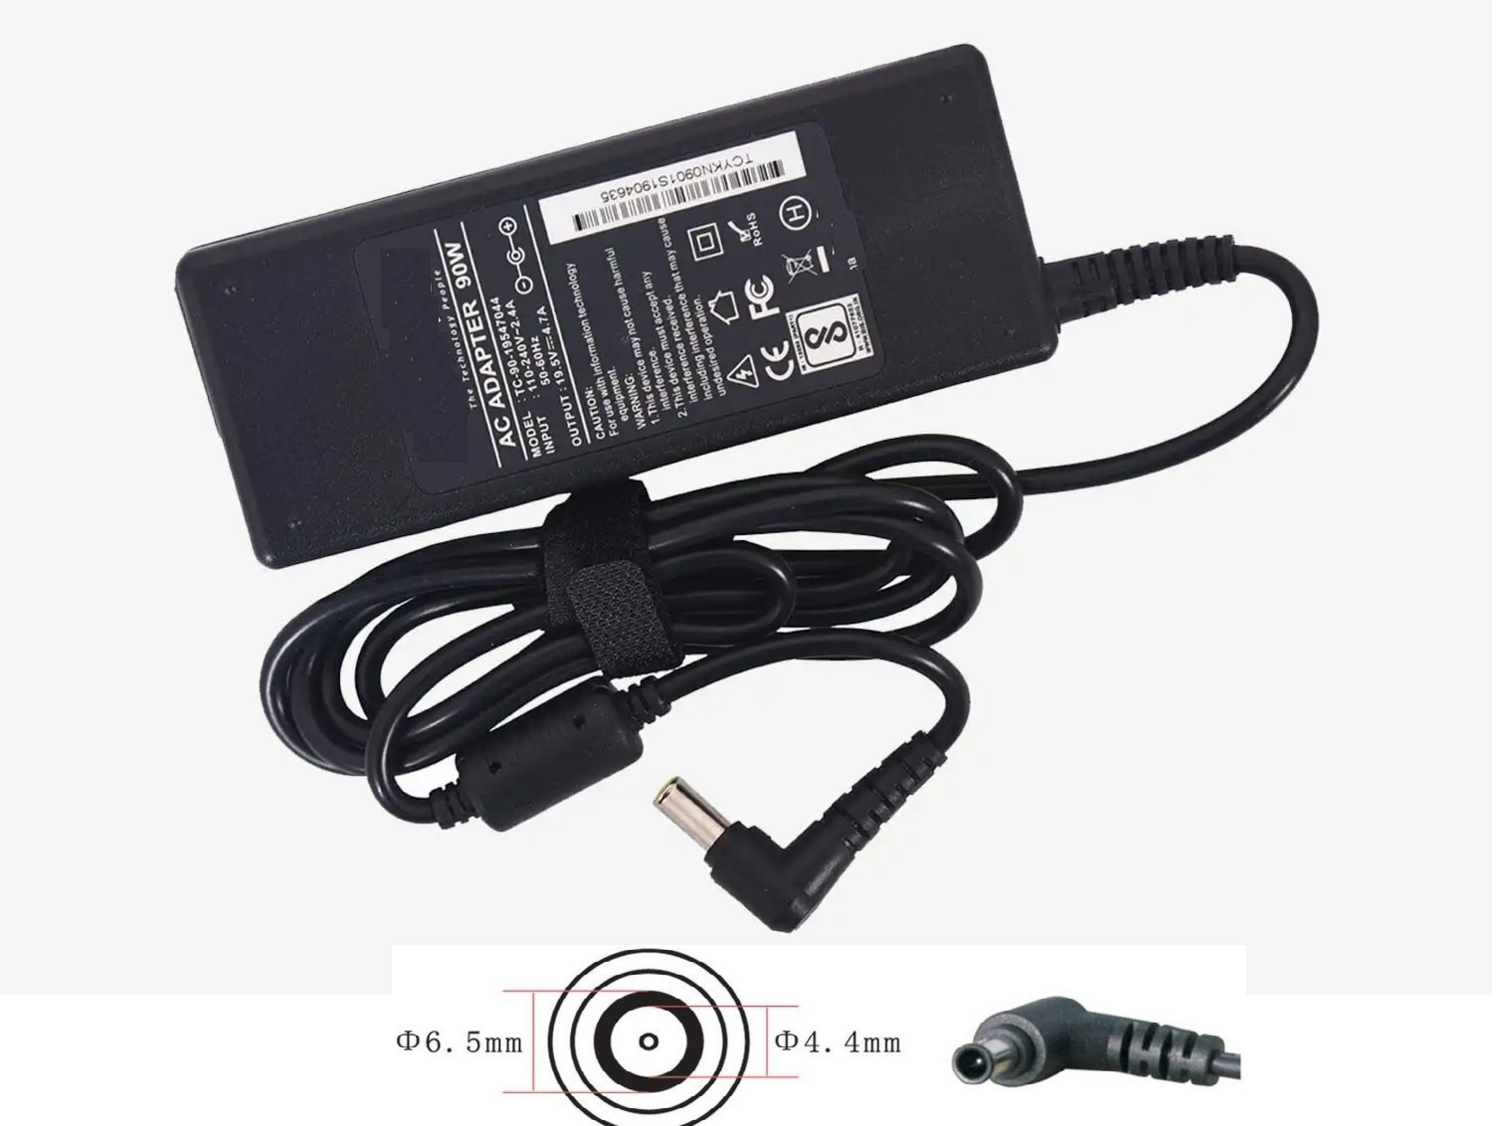 Sony vaio BZ series SR series Z Series Compatible Laptop charger / AC power Adaptor